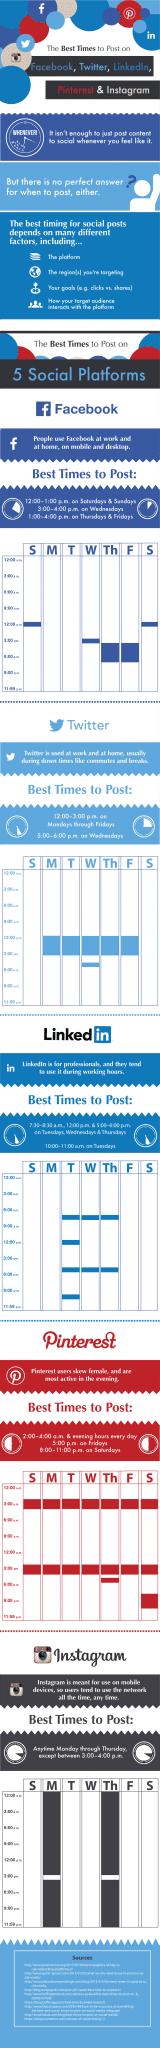 best-times-to-post-on-social-media-infographic